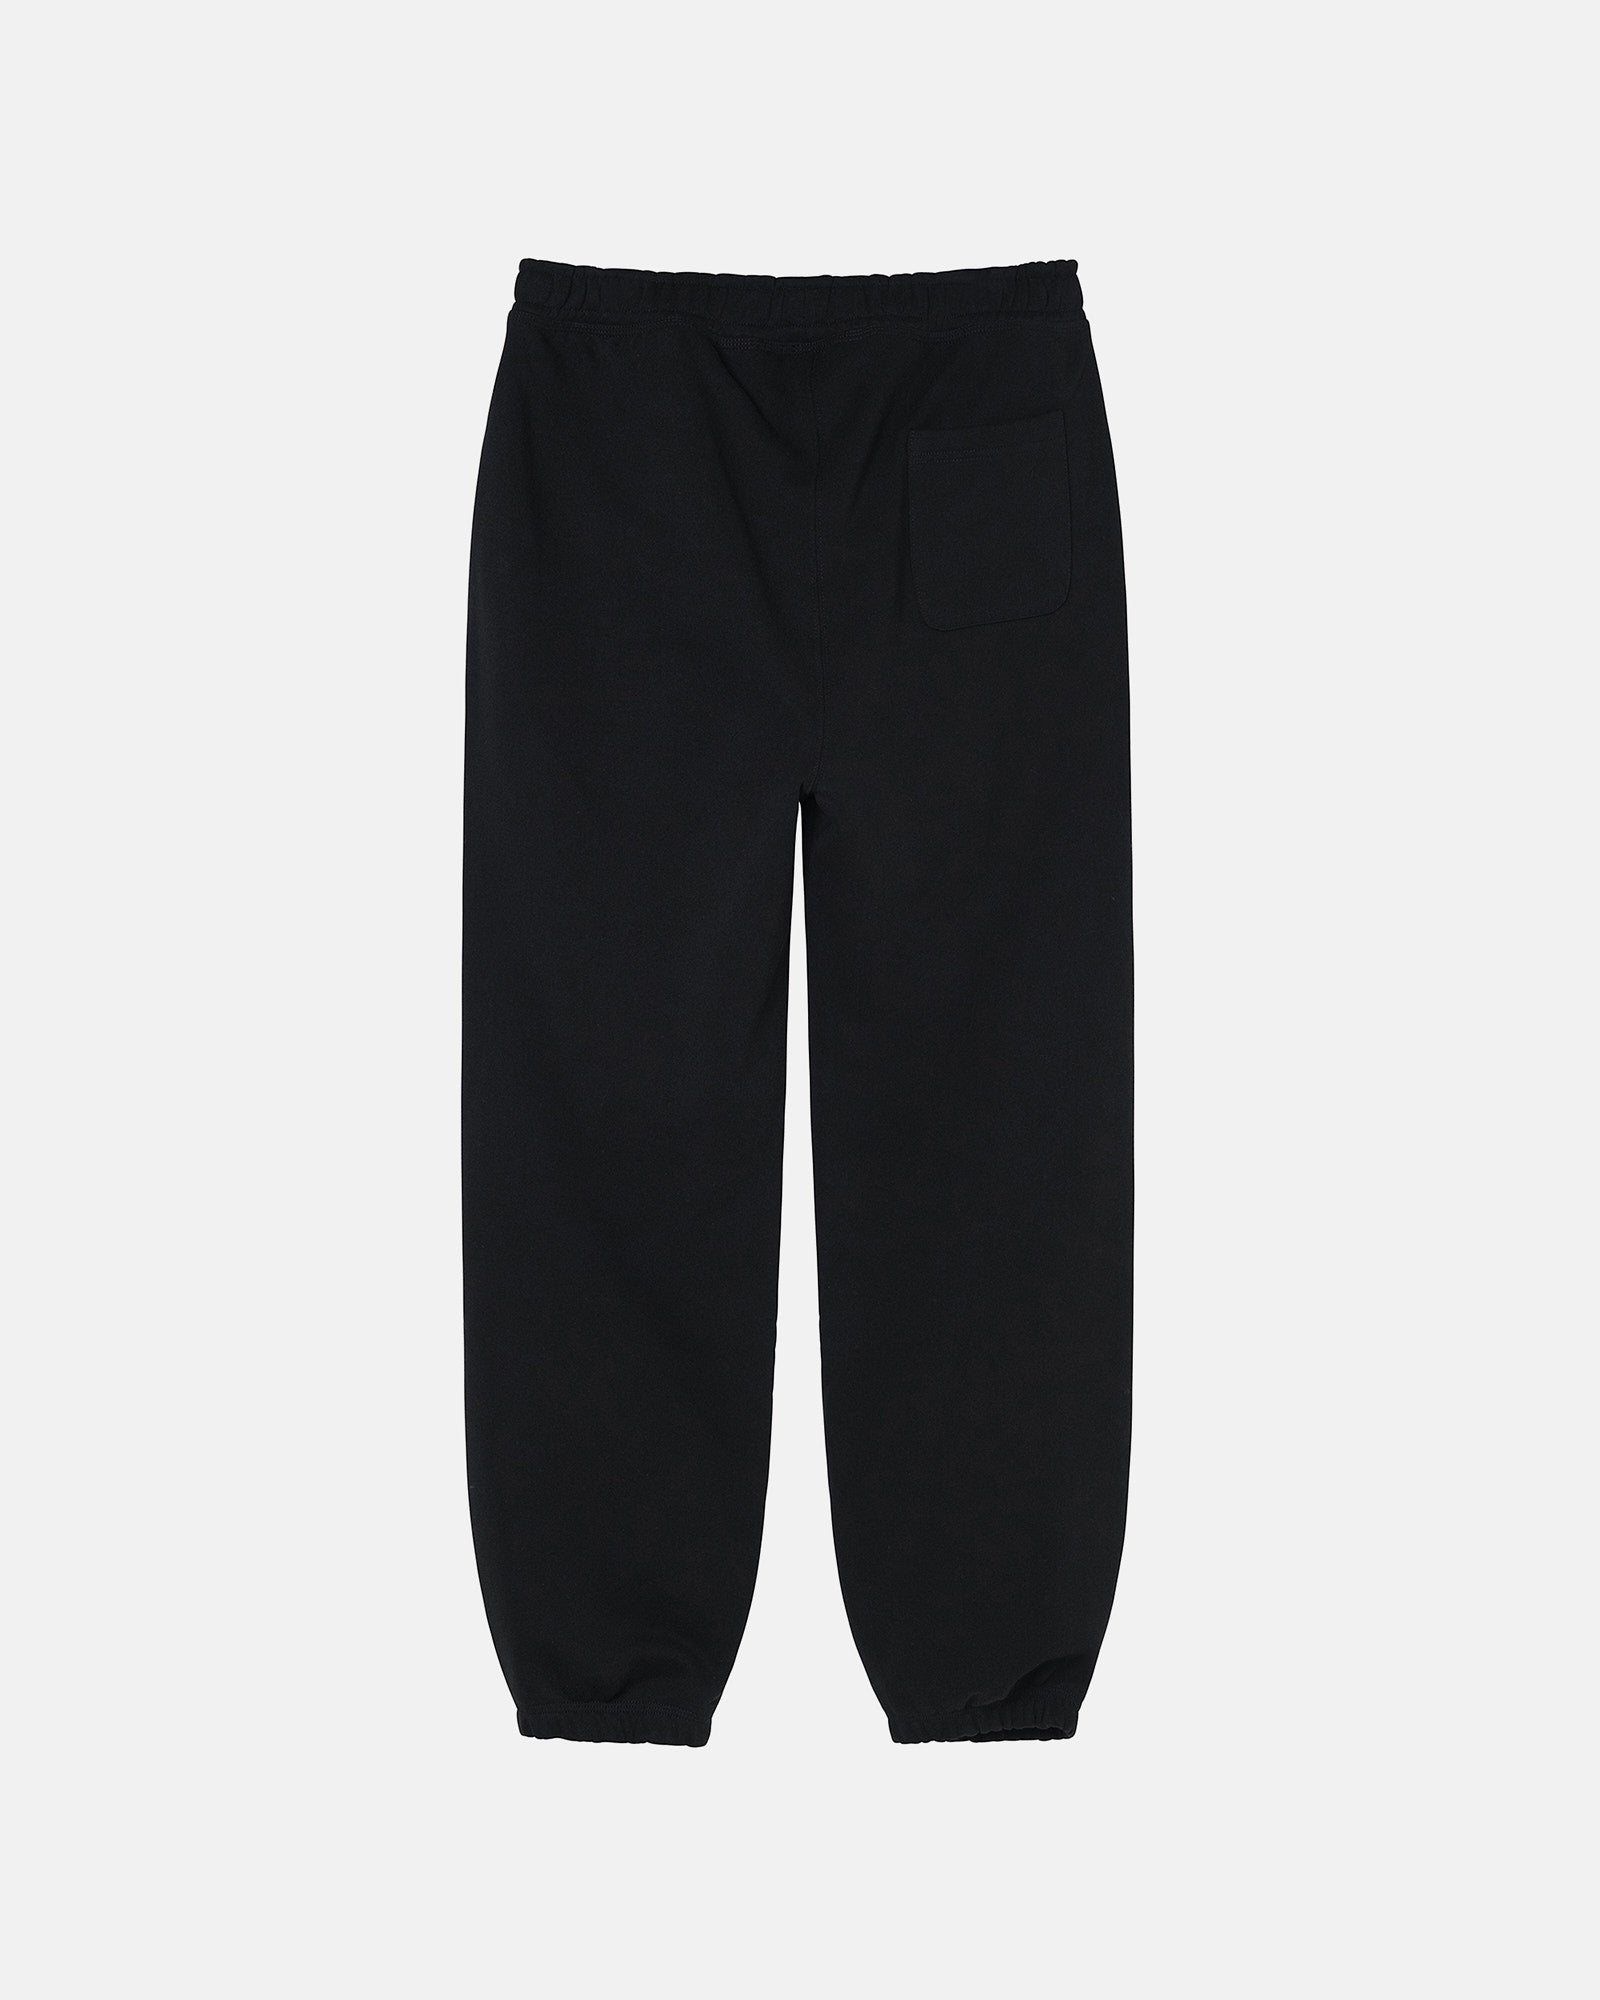 8 BALL EMBROIDERED SWEATPANT